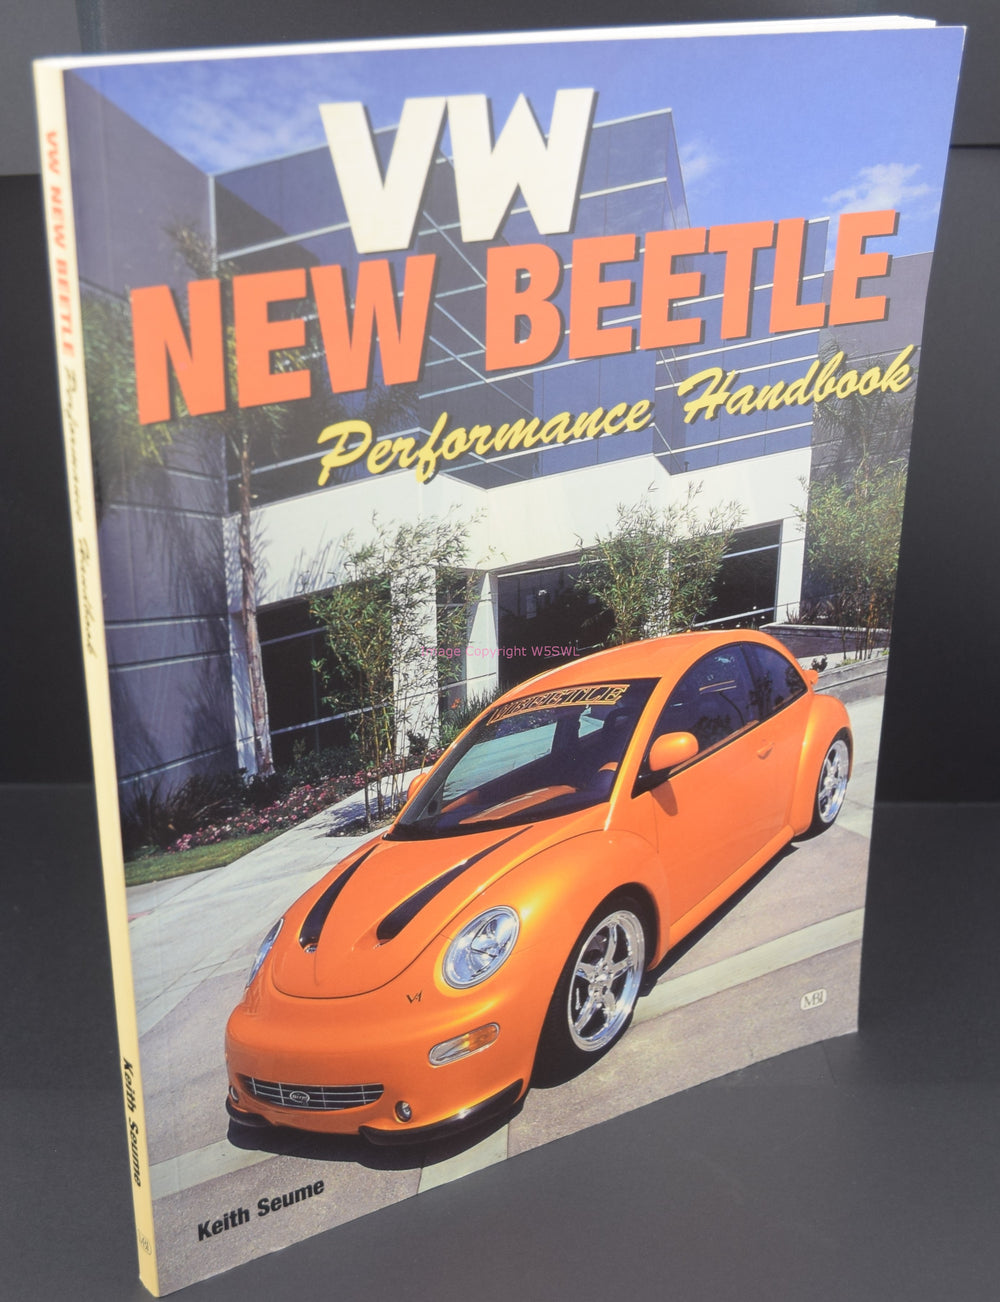 VW New Beetle Performance Handbook - Dave's Hobby Shop by W5SWL